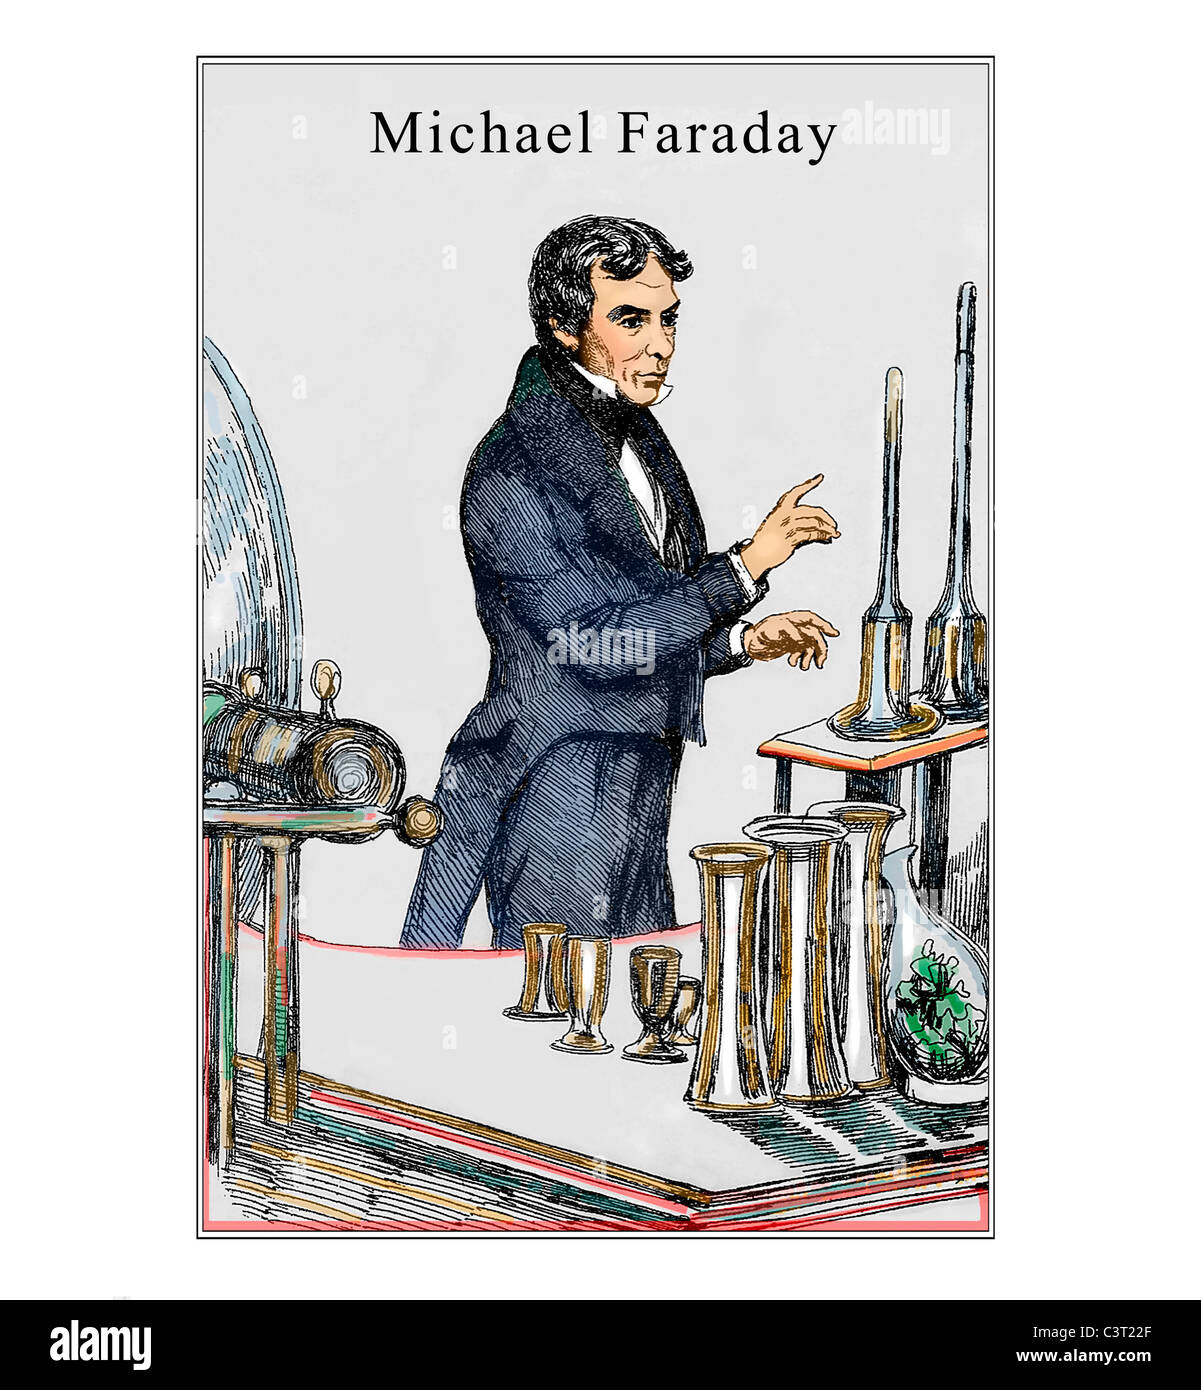 Michael Faraday 1791 1867 English Chemist Physicist Illustration from an Engraving Stock Photo